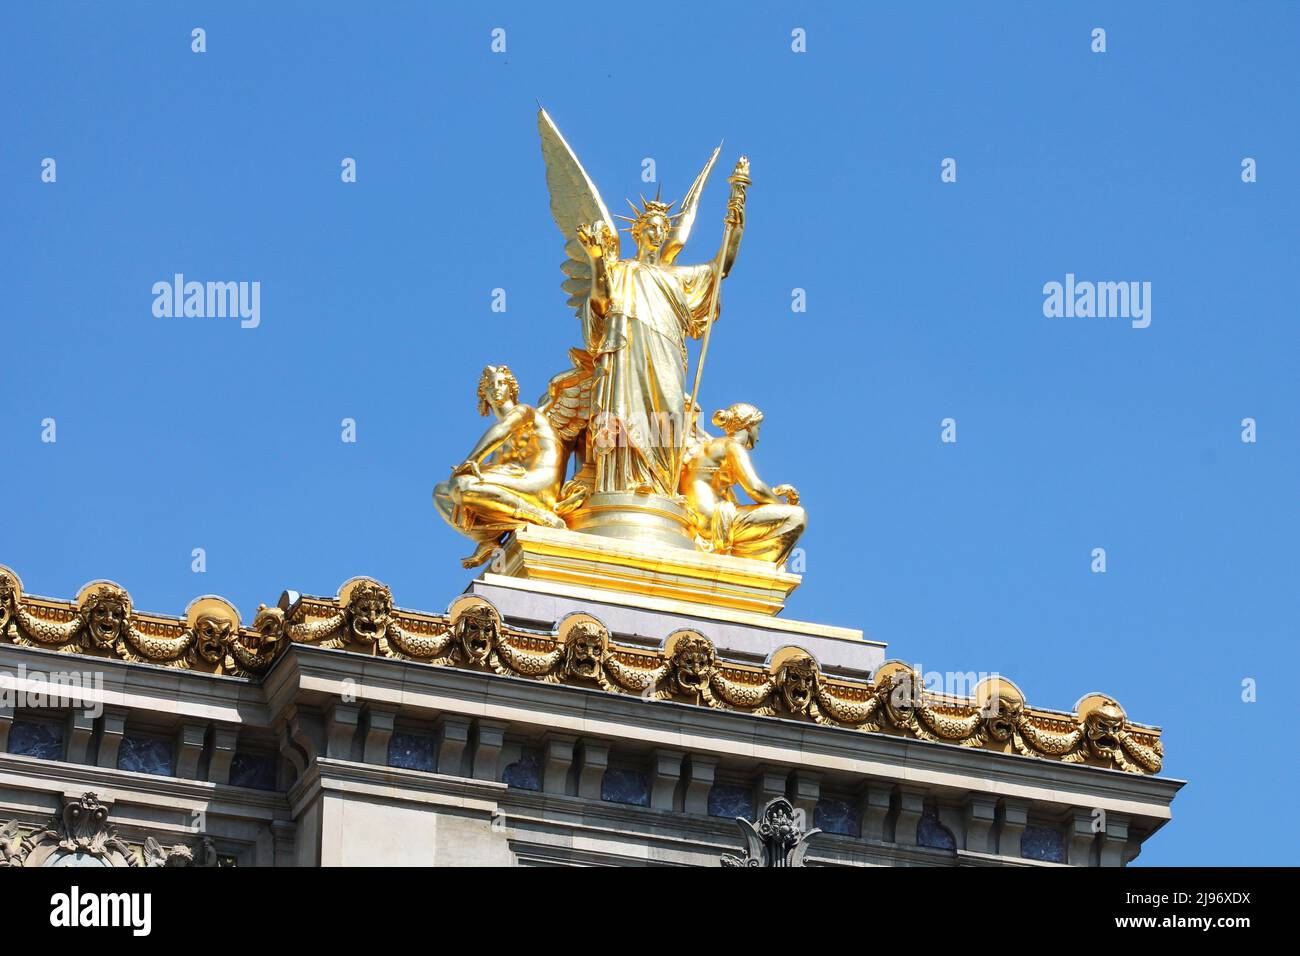 Charles Gumery's gilded sculpture La Poésie (Poetry), shines in the sunlight atop the roof of the Palais Garnier (Paris Opera House) in Paris, France. Stock Photo